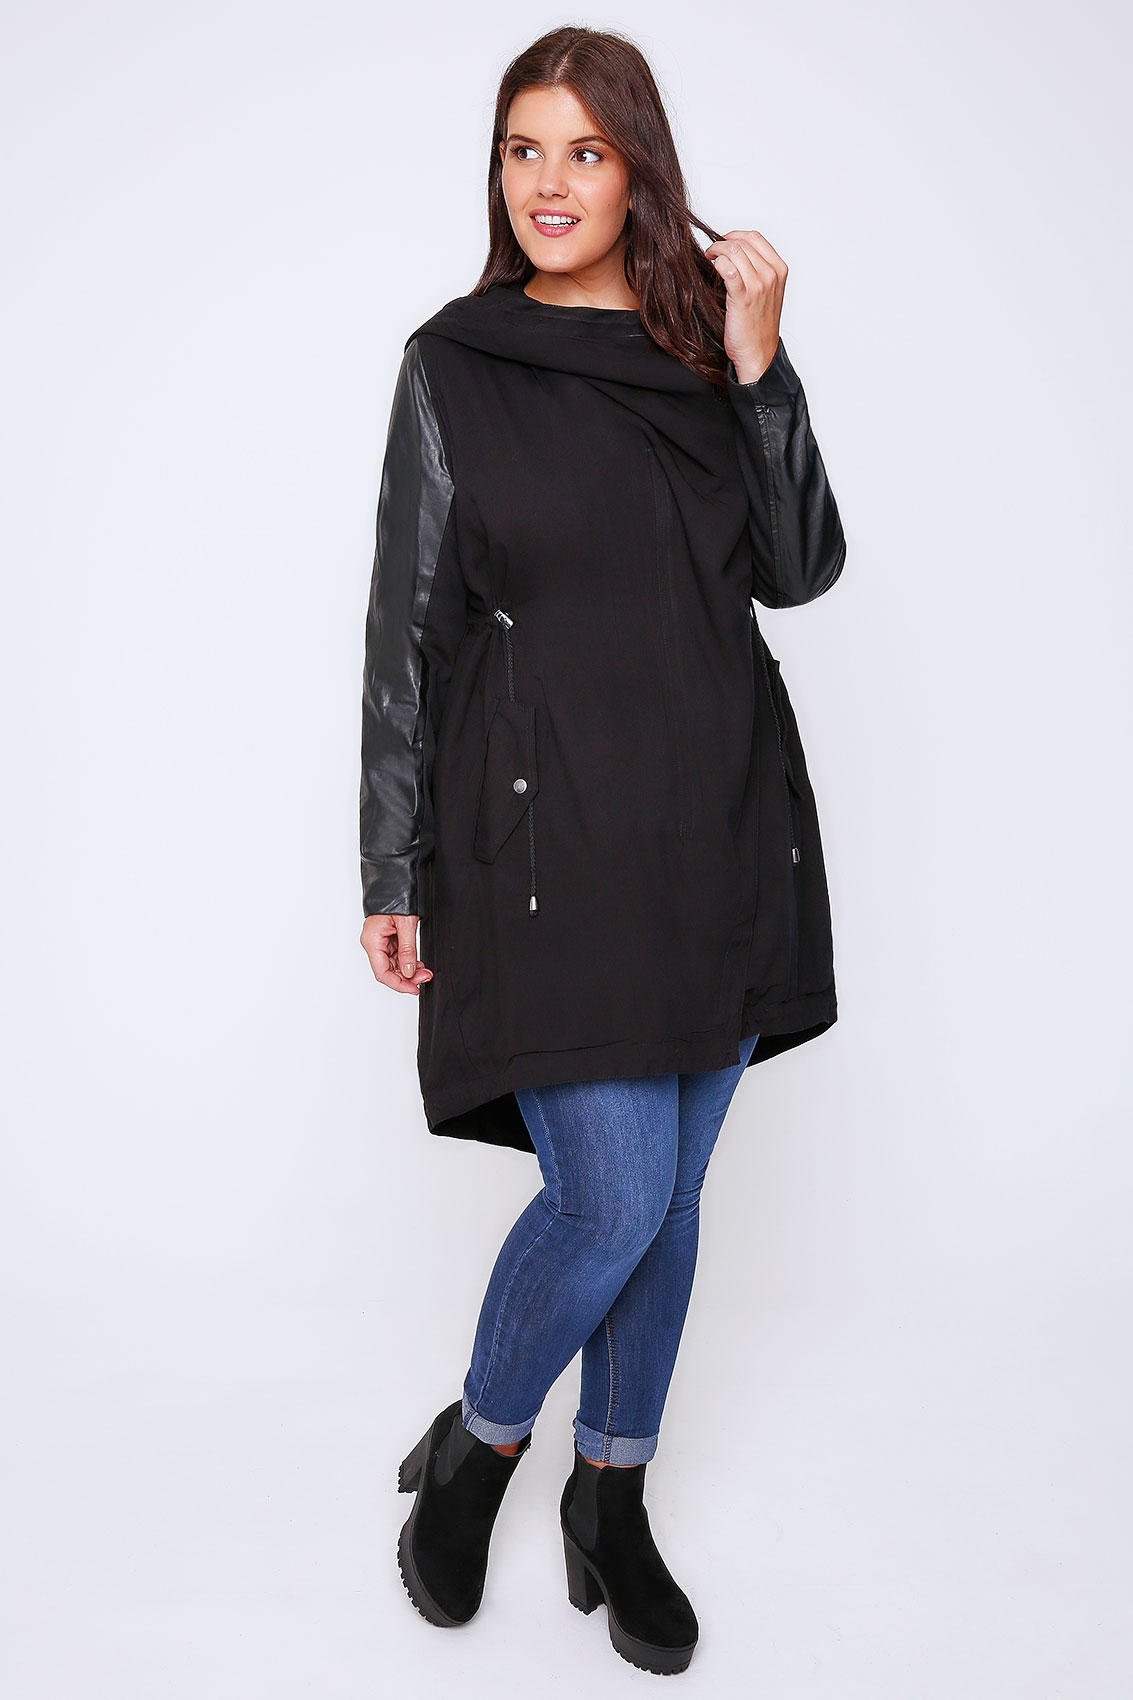 Black Cocoon Shaped Parka Coat With PU Sleeves Plus Size 16 to 32